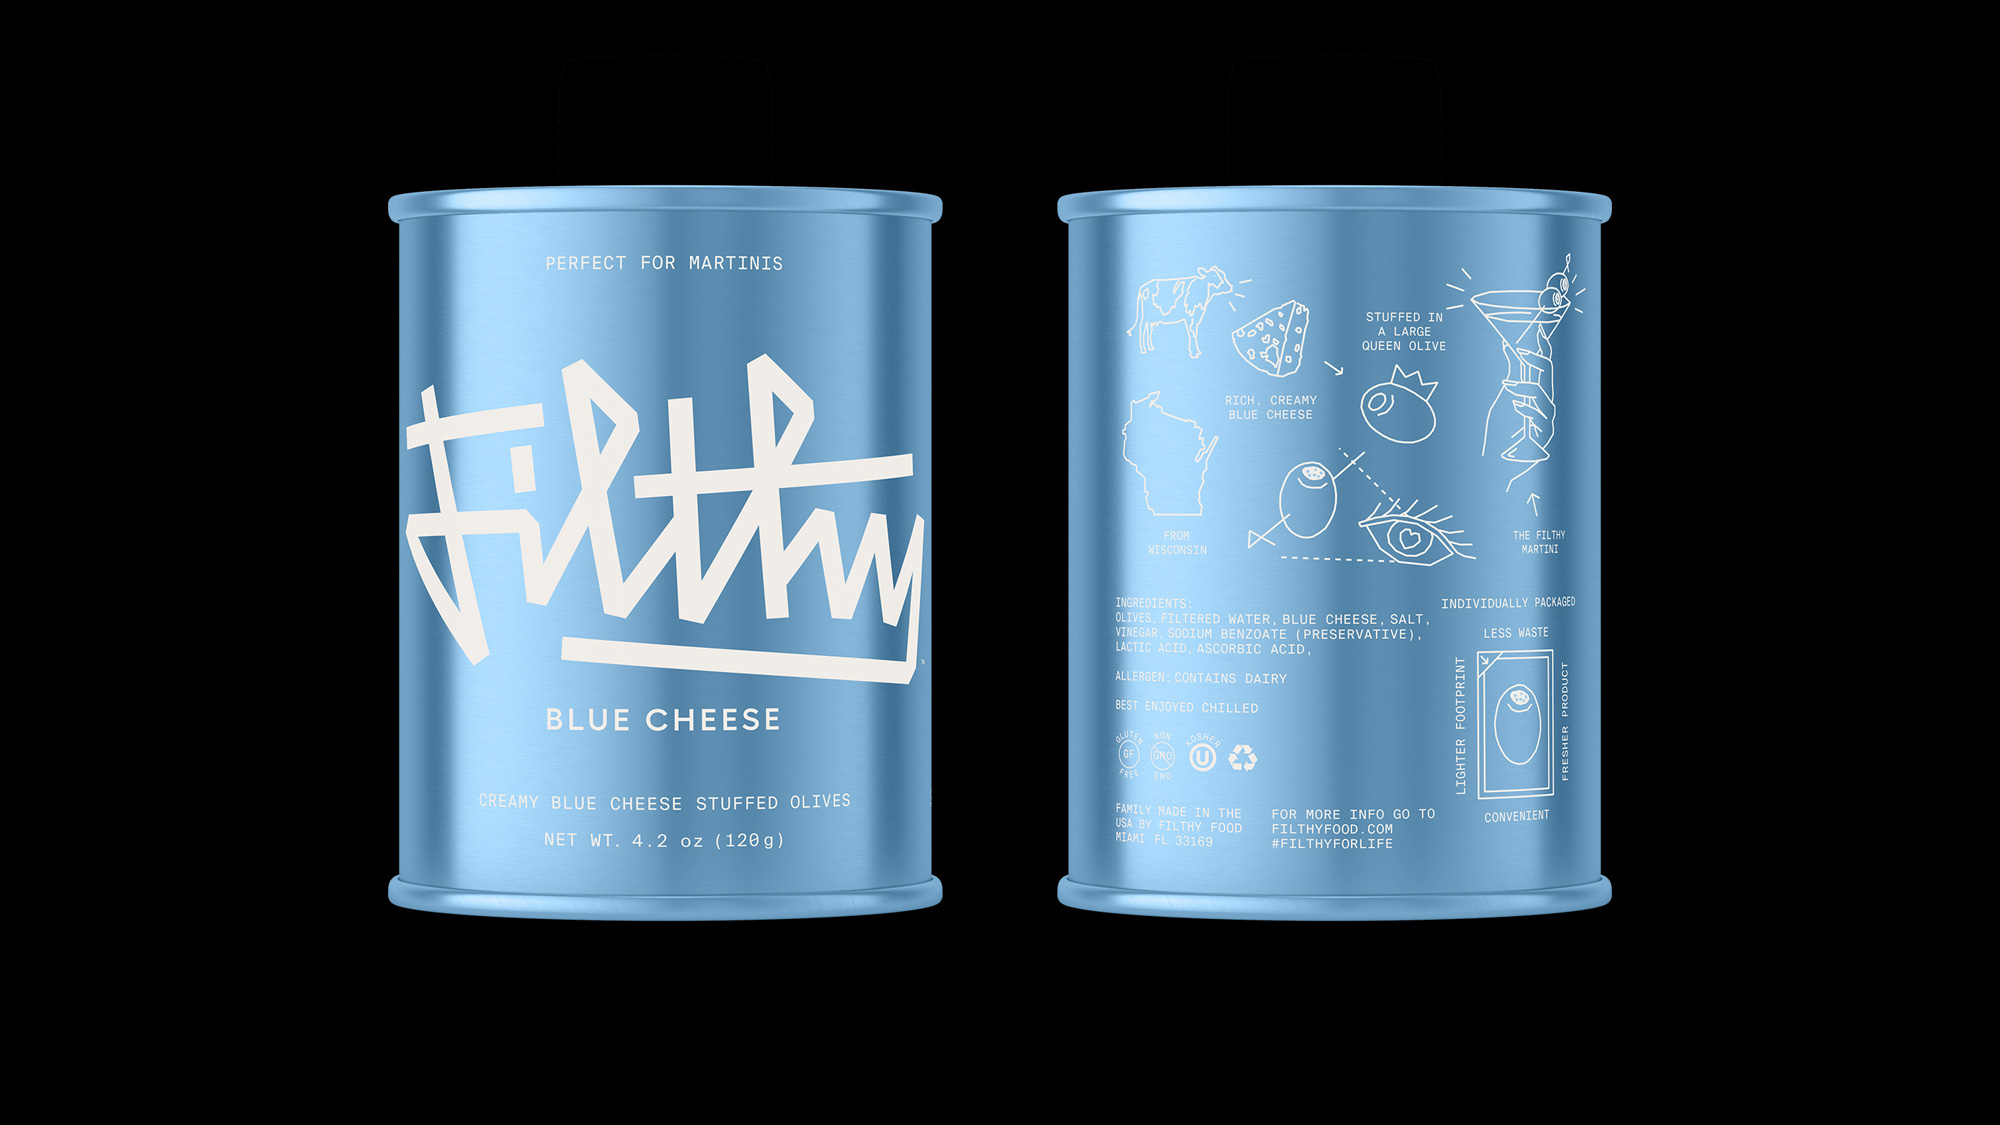 New Logo, Identity, and Packaging for Filthy Food by Mother Design